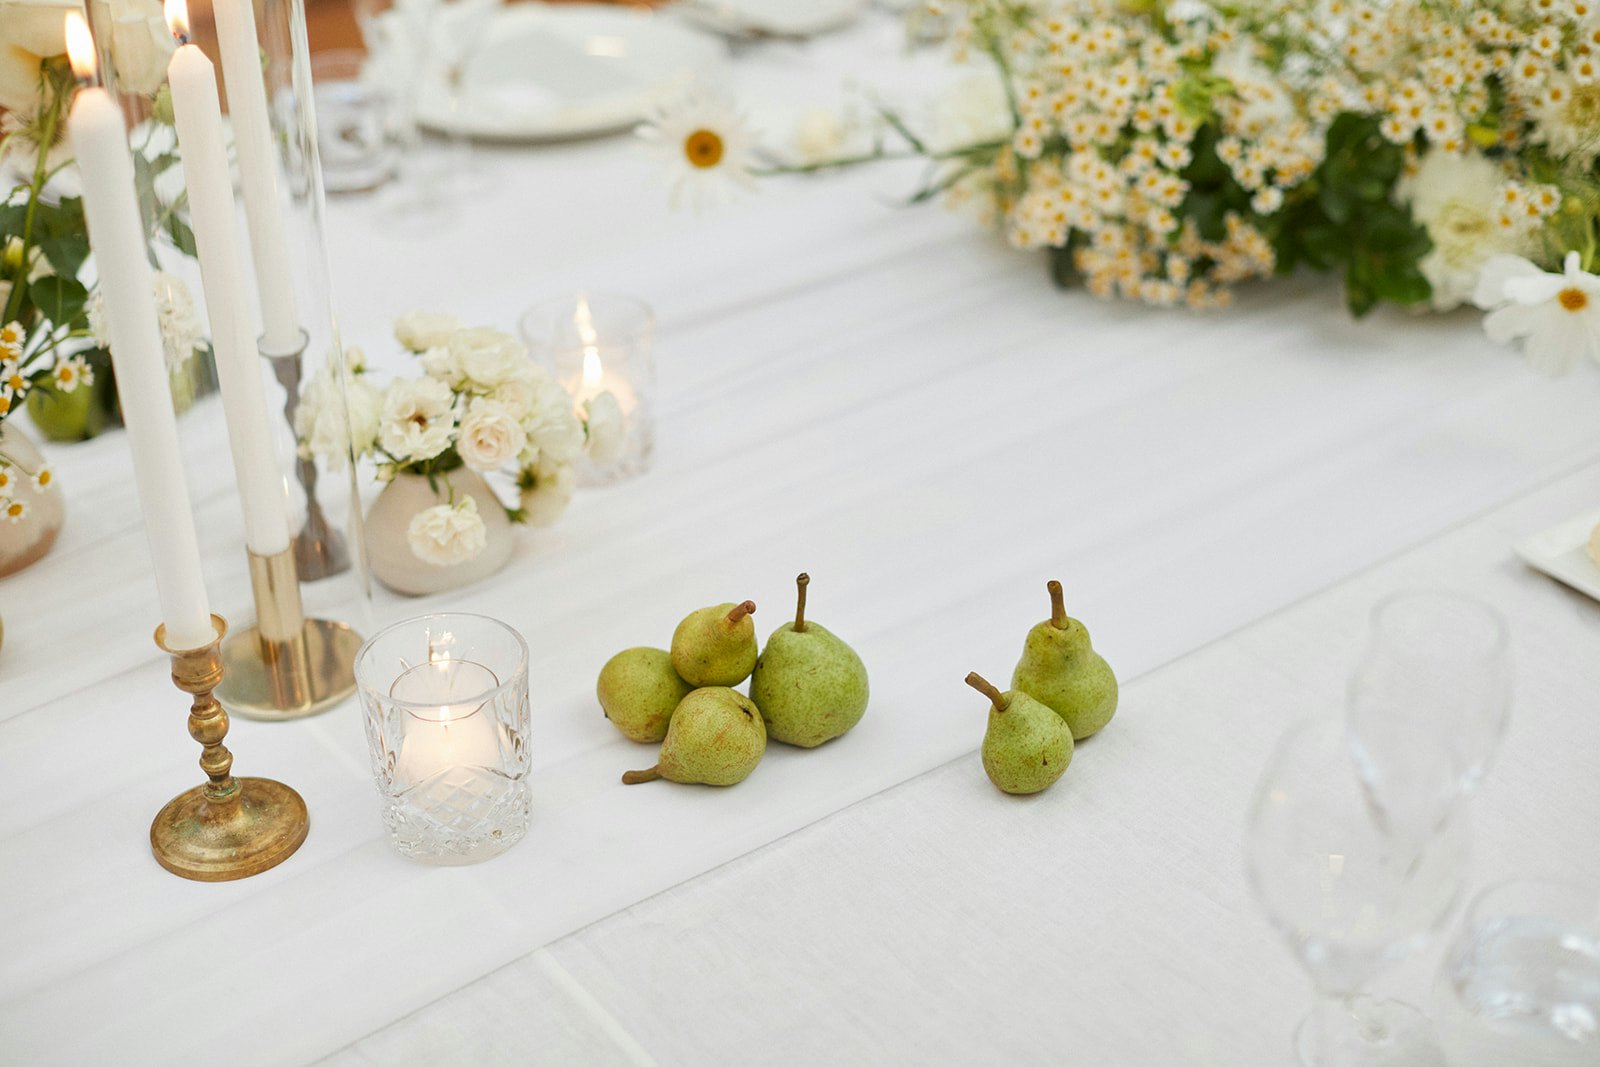 Wedding table with pears on and flowers on it